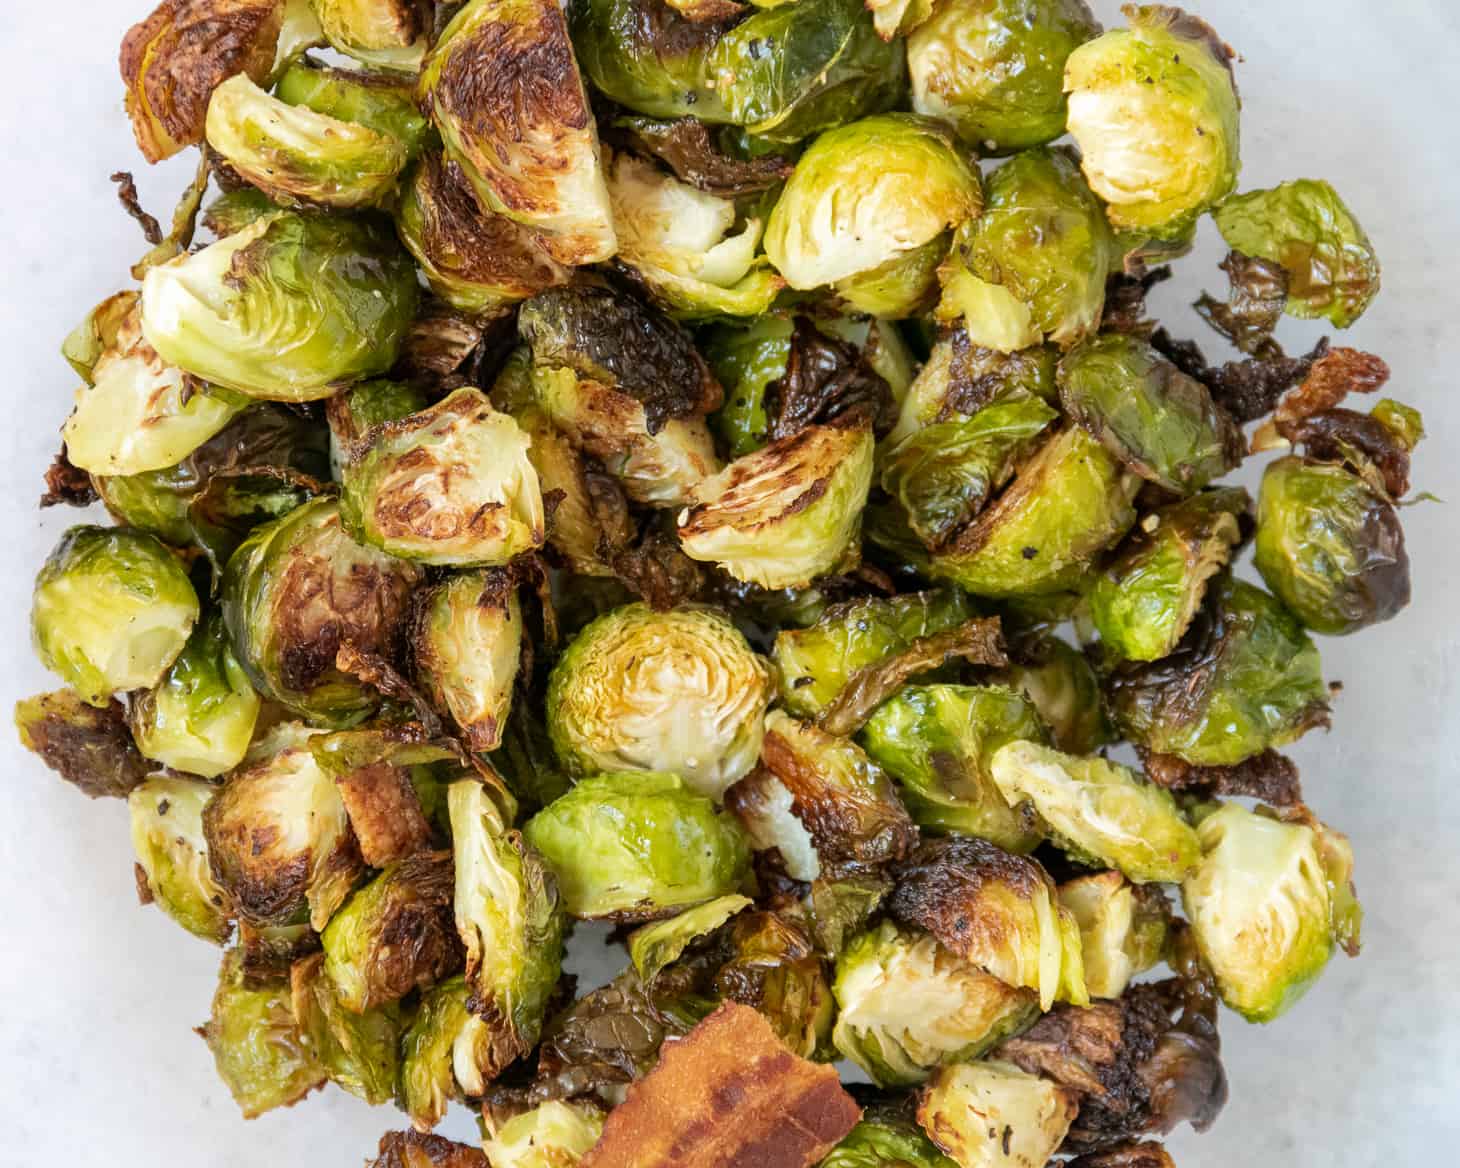 A bowl of Roasted Brussels Sprouts.